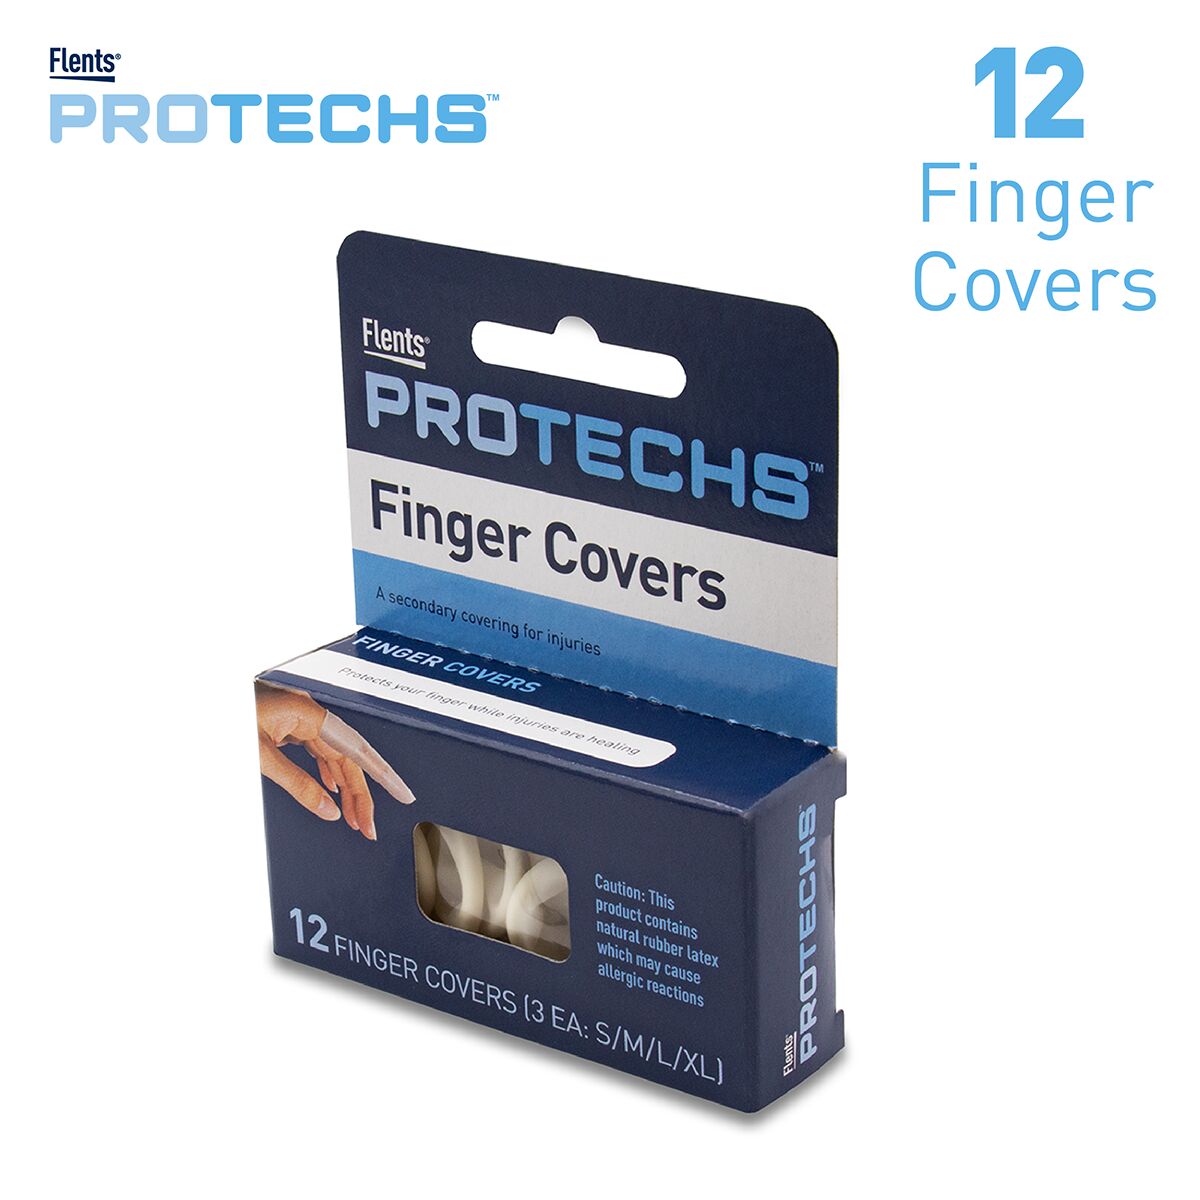 Flents Finger Covers, Economy Pack - 36 covers